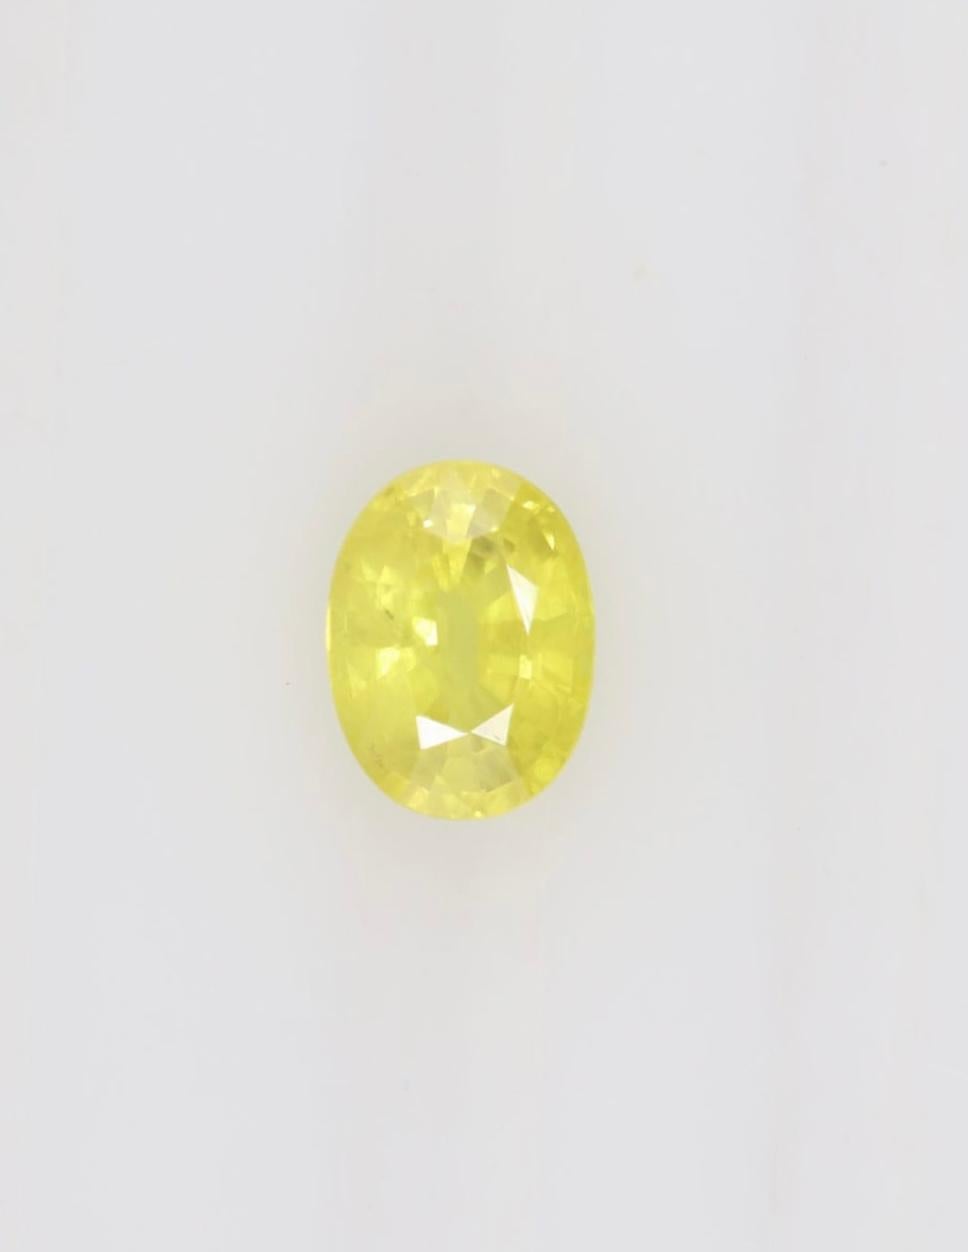 High quality precious gemstone.
We offer also personalised Made in Italy jewellery design using this gemstone.

• Dimensions: 8.49 x 6.35 x 4.67 mm
• Total carat weight: 2.24 carat
• Cut: Oval
(SY1C)

We offer complimentary gemological laboratory